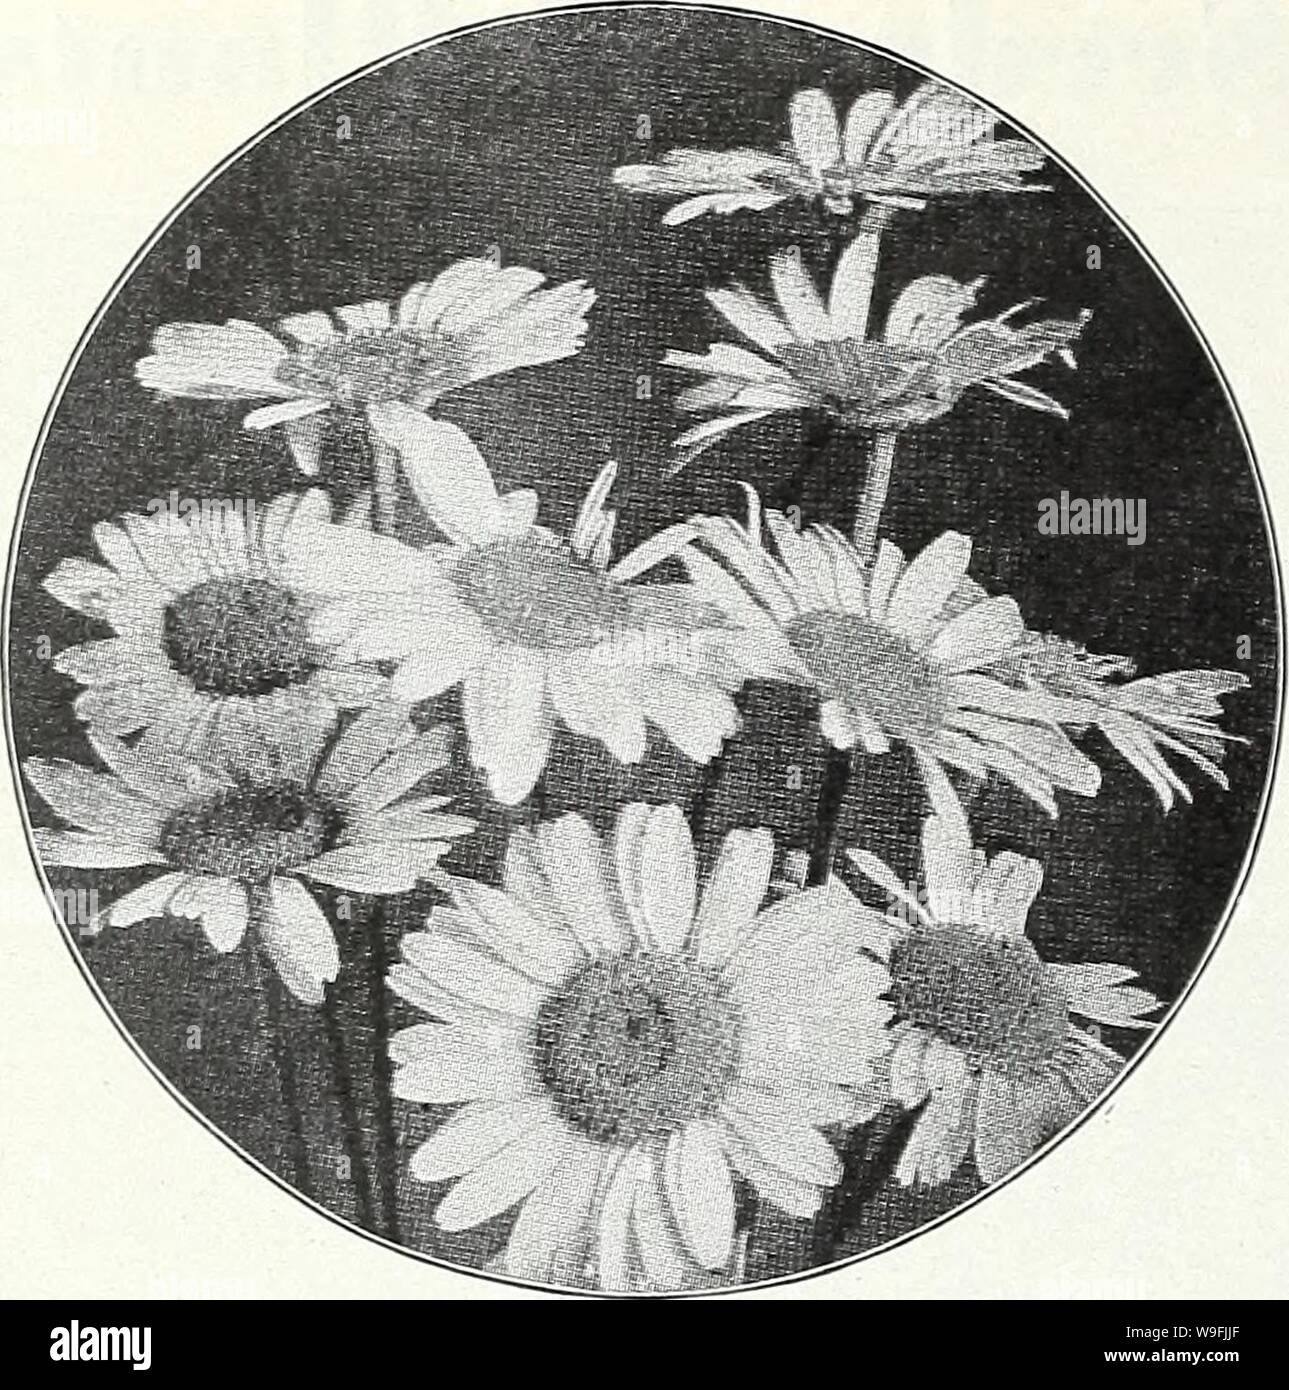 Archive image from page 47 of Currie's garden annual  spring. Currie's garden annual : spring 1934 59th year  curriesgardenann19curr 0 Year: 1934 ( Page 44 CURRIE BROTHERS CO., MILWAUKEE, WIS    ARABIS (Rock Cress) ALPINA—A hardy perennial and one of the earliest and prettiest spring flowers. The spreading tufts are covered with a sheet of pure white flowers as soon as the snow disappears. Unequaled for rockeries or edging; withstands the drought, and is always neat. 6 inches. Plants, price, each, 25c; per dozen, $2.50. Seeds,  oz., 25c Pkt. 10c ARABIS ALPINA ROSEA Delicate pale pink. Plants, Stock Photo